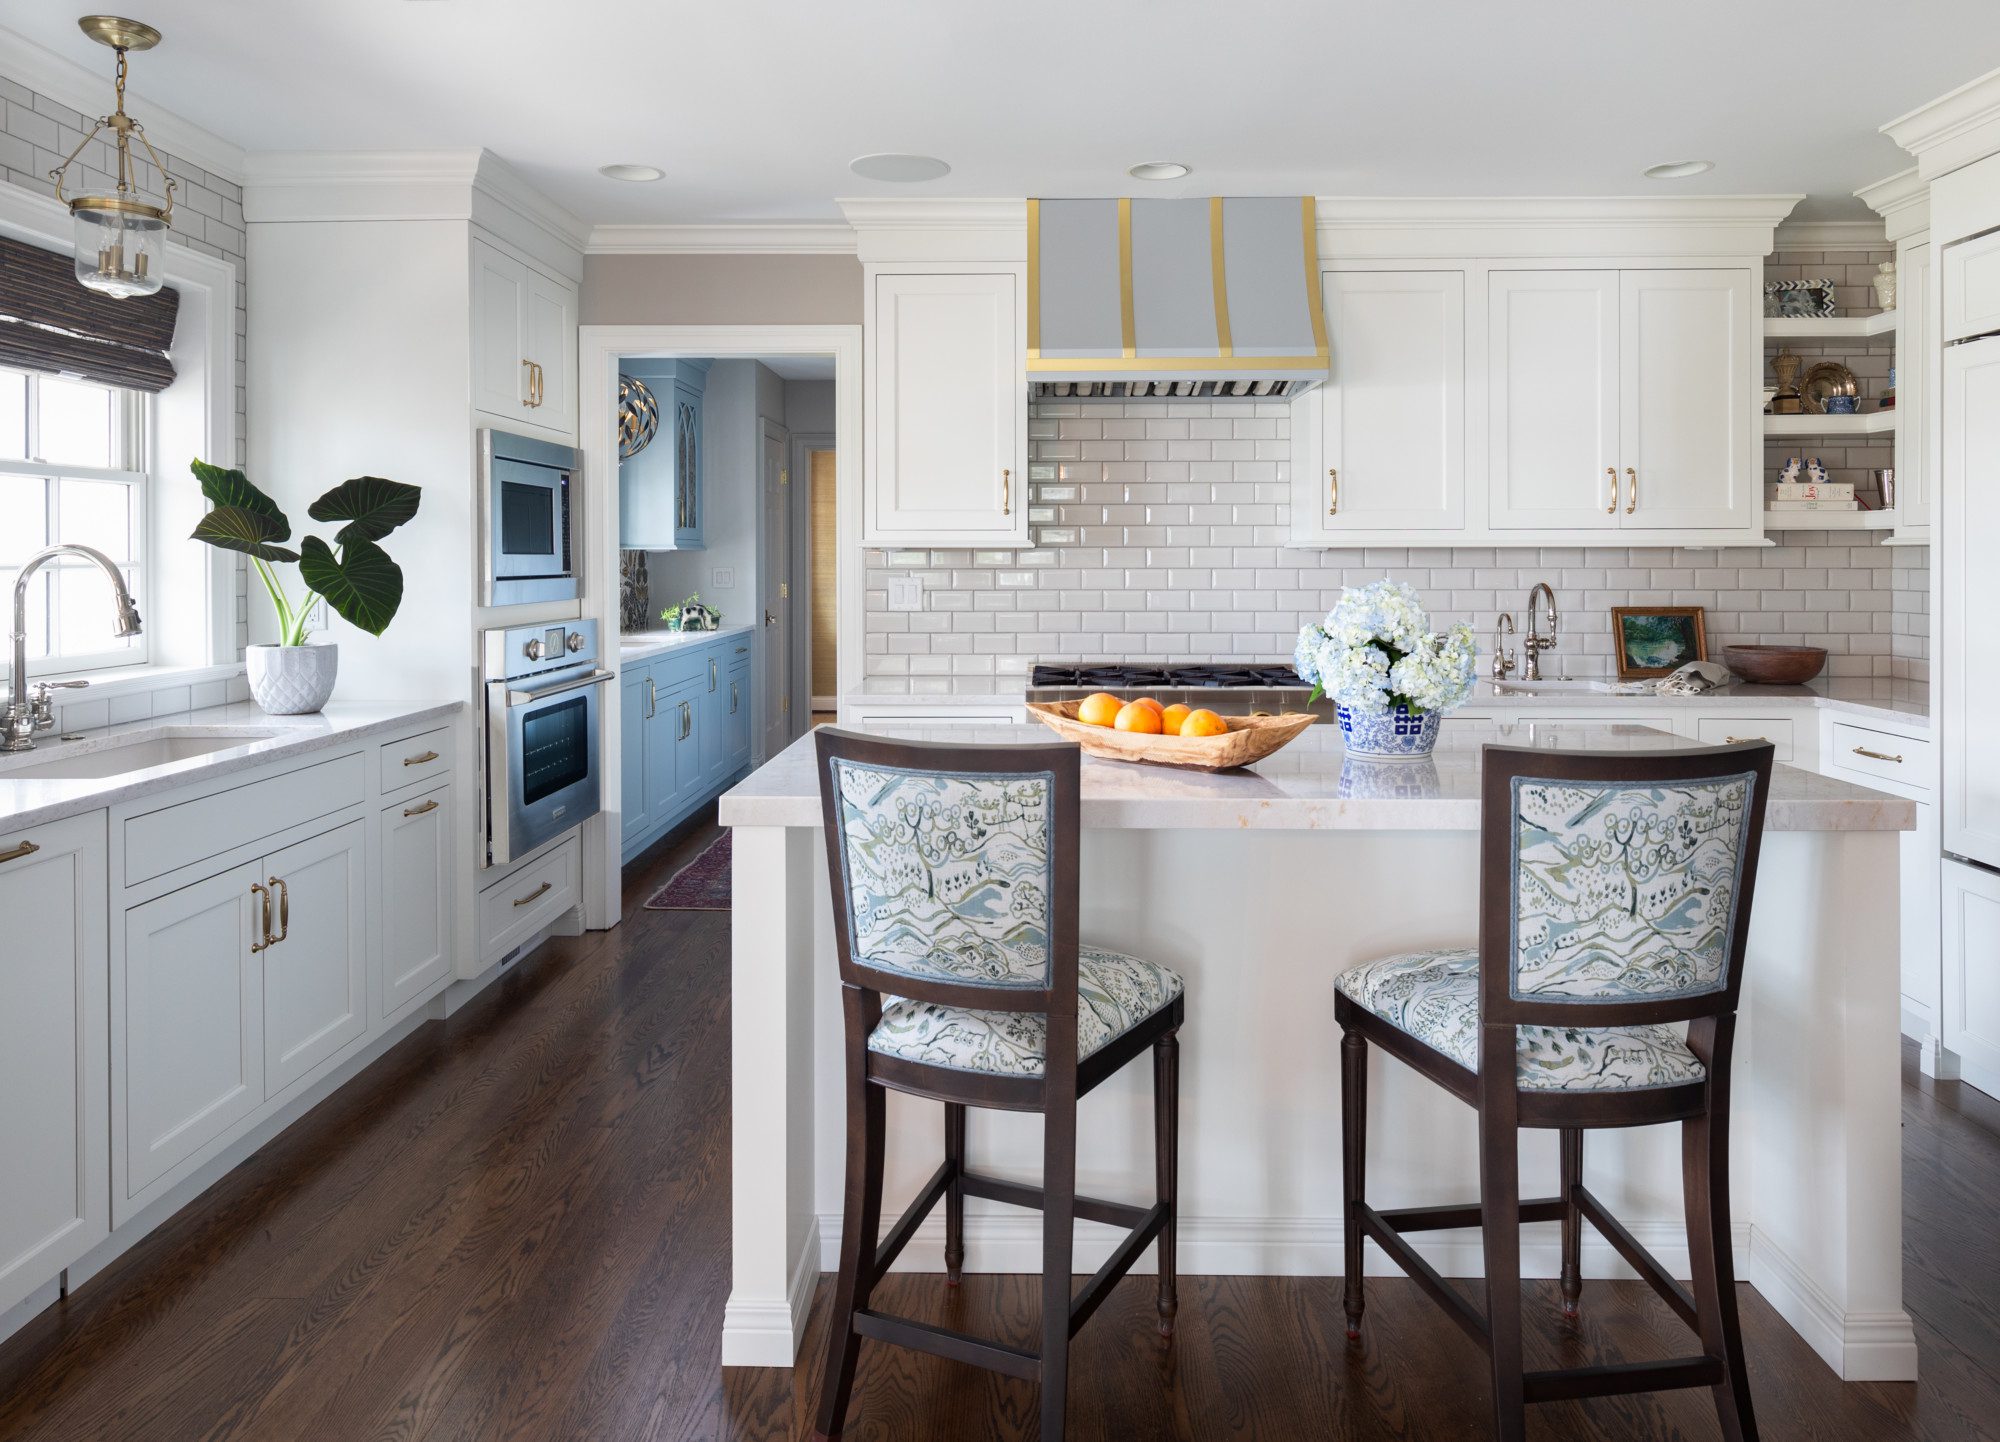 View of a clean and fresh kitchen with a blue, white and gold color scheme.